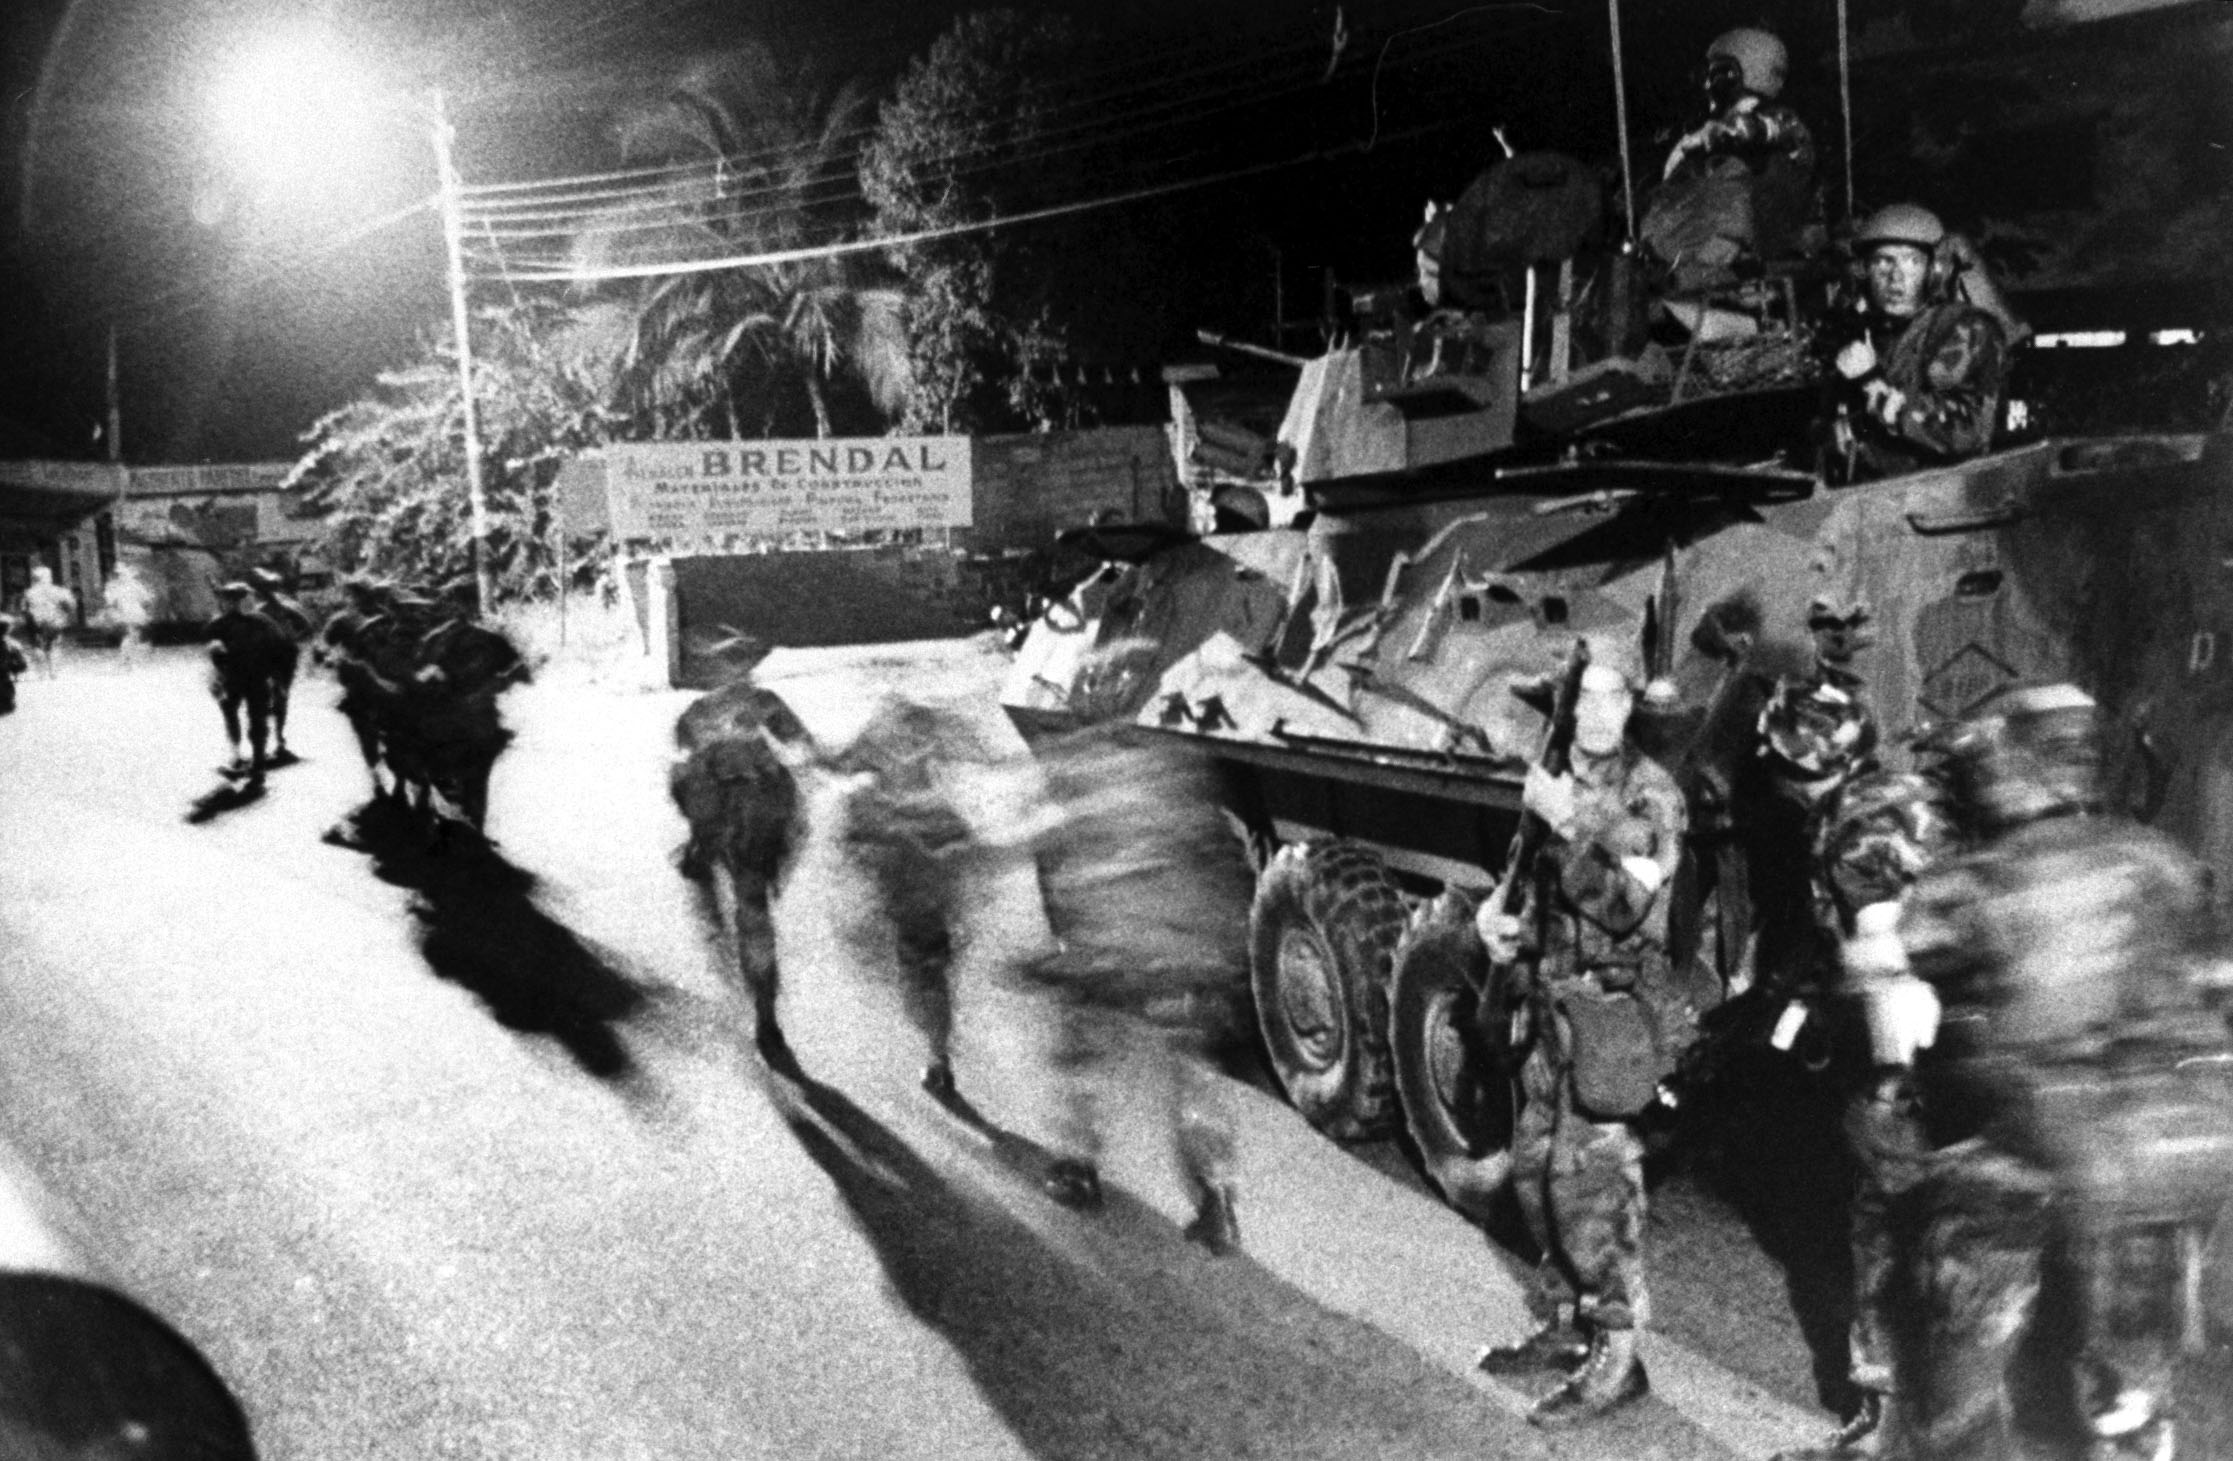 PHOTO: US Marines from Second Light Armored Infantry Battalion and First Fleet Anti-terrorism Security Team conducting Operations on foot during Panama invasion, Dec. 20, 1989.